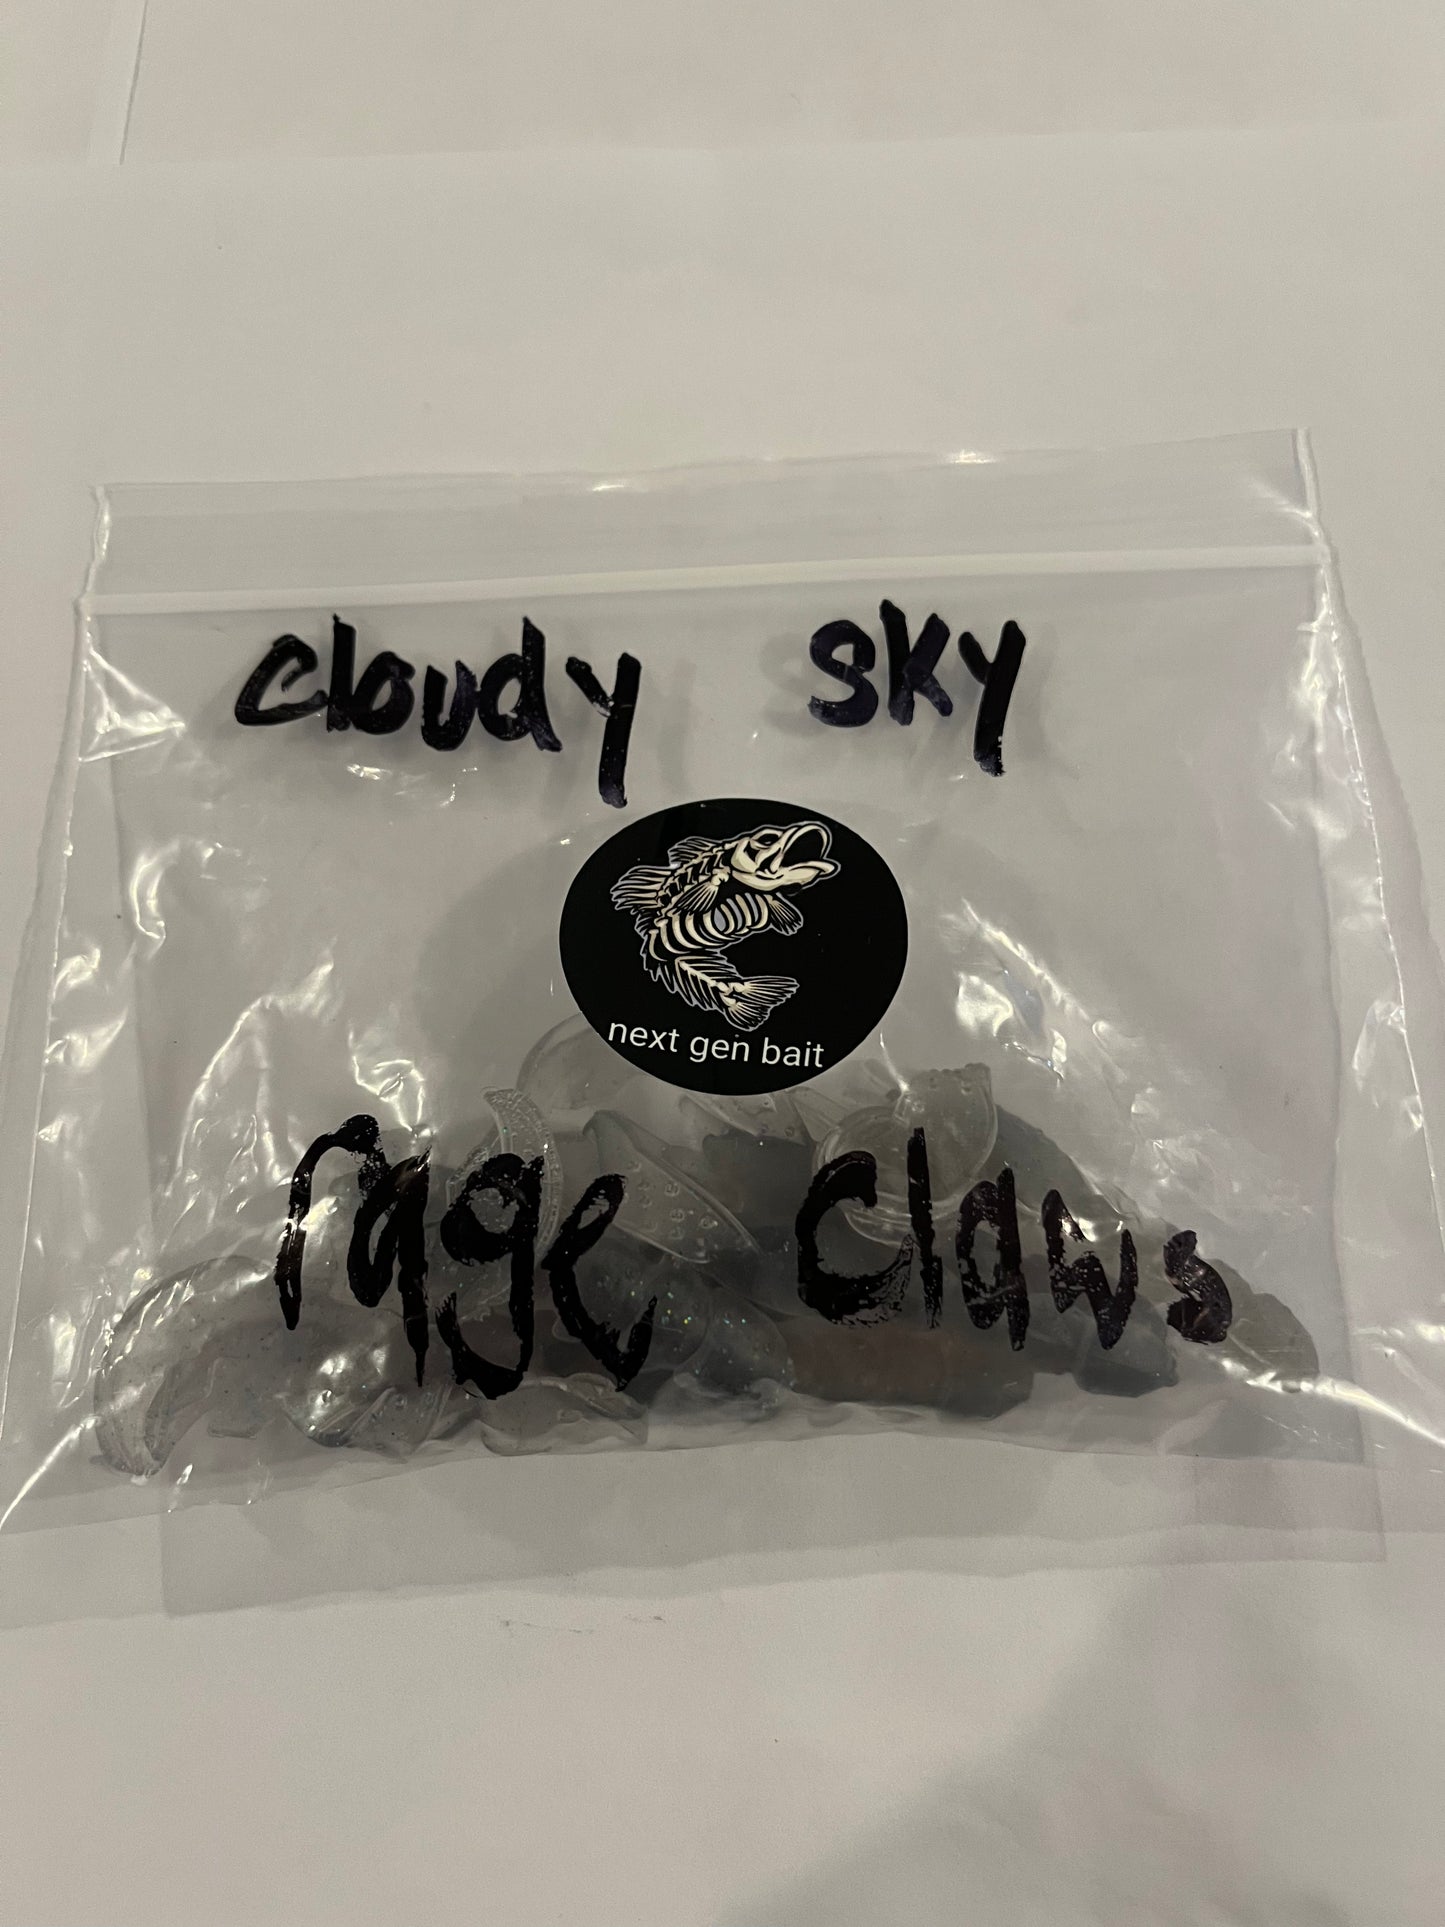 Cloudy Sky Rage Claws